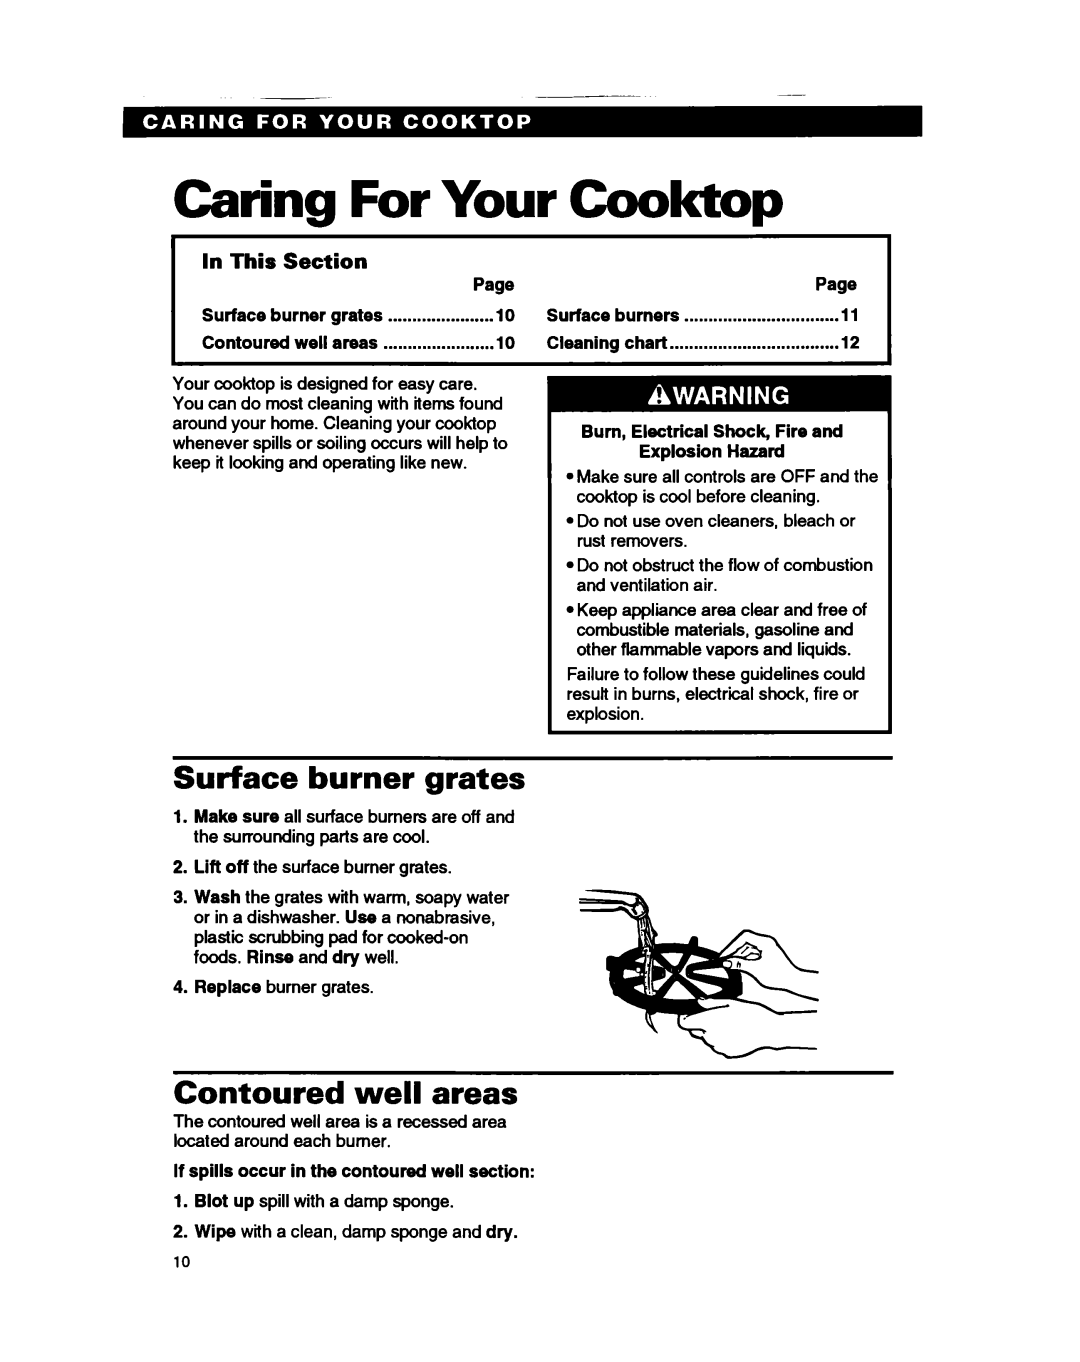 Whirlpool SC8636EB warranty Caring For Your Cooktop, Surface burner grates, Contoured well areas, In This Section, Page 